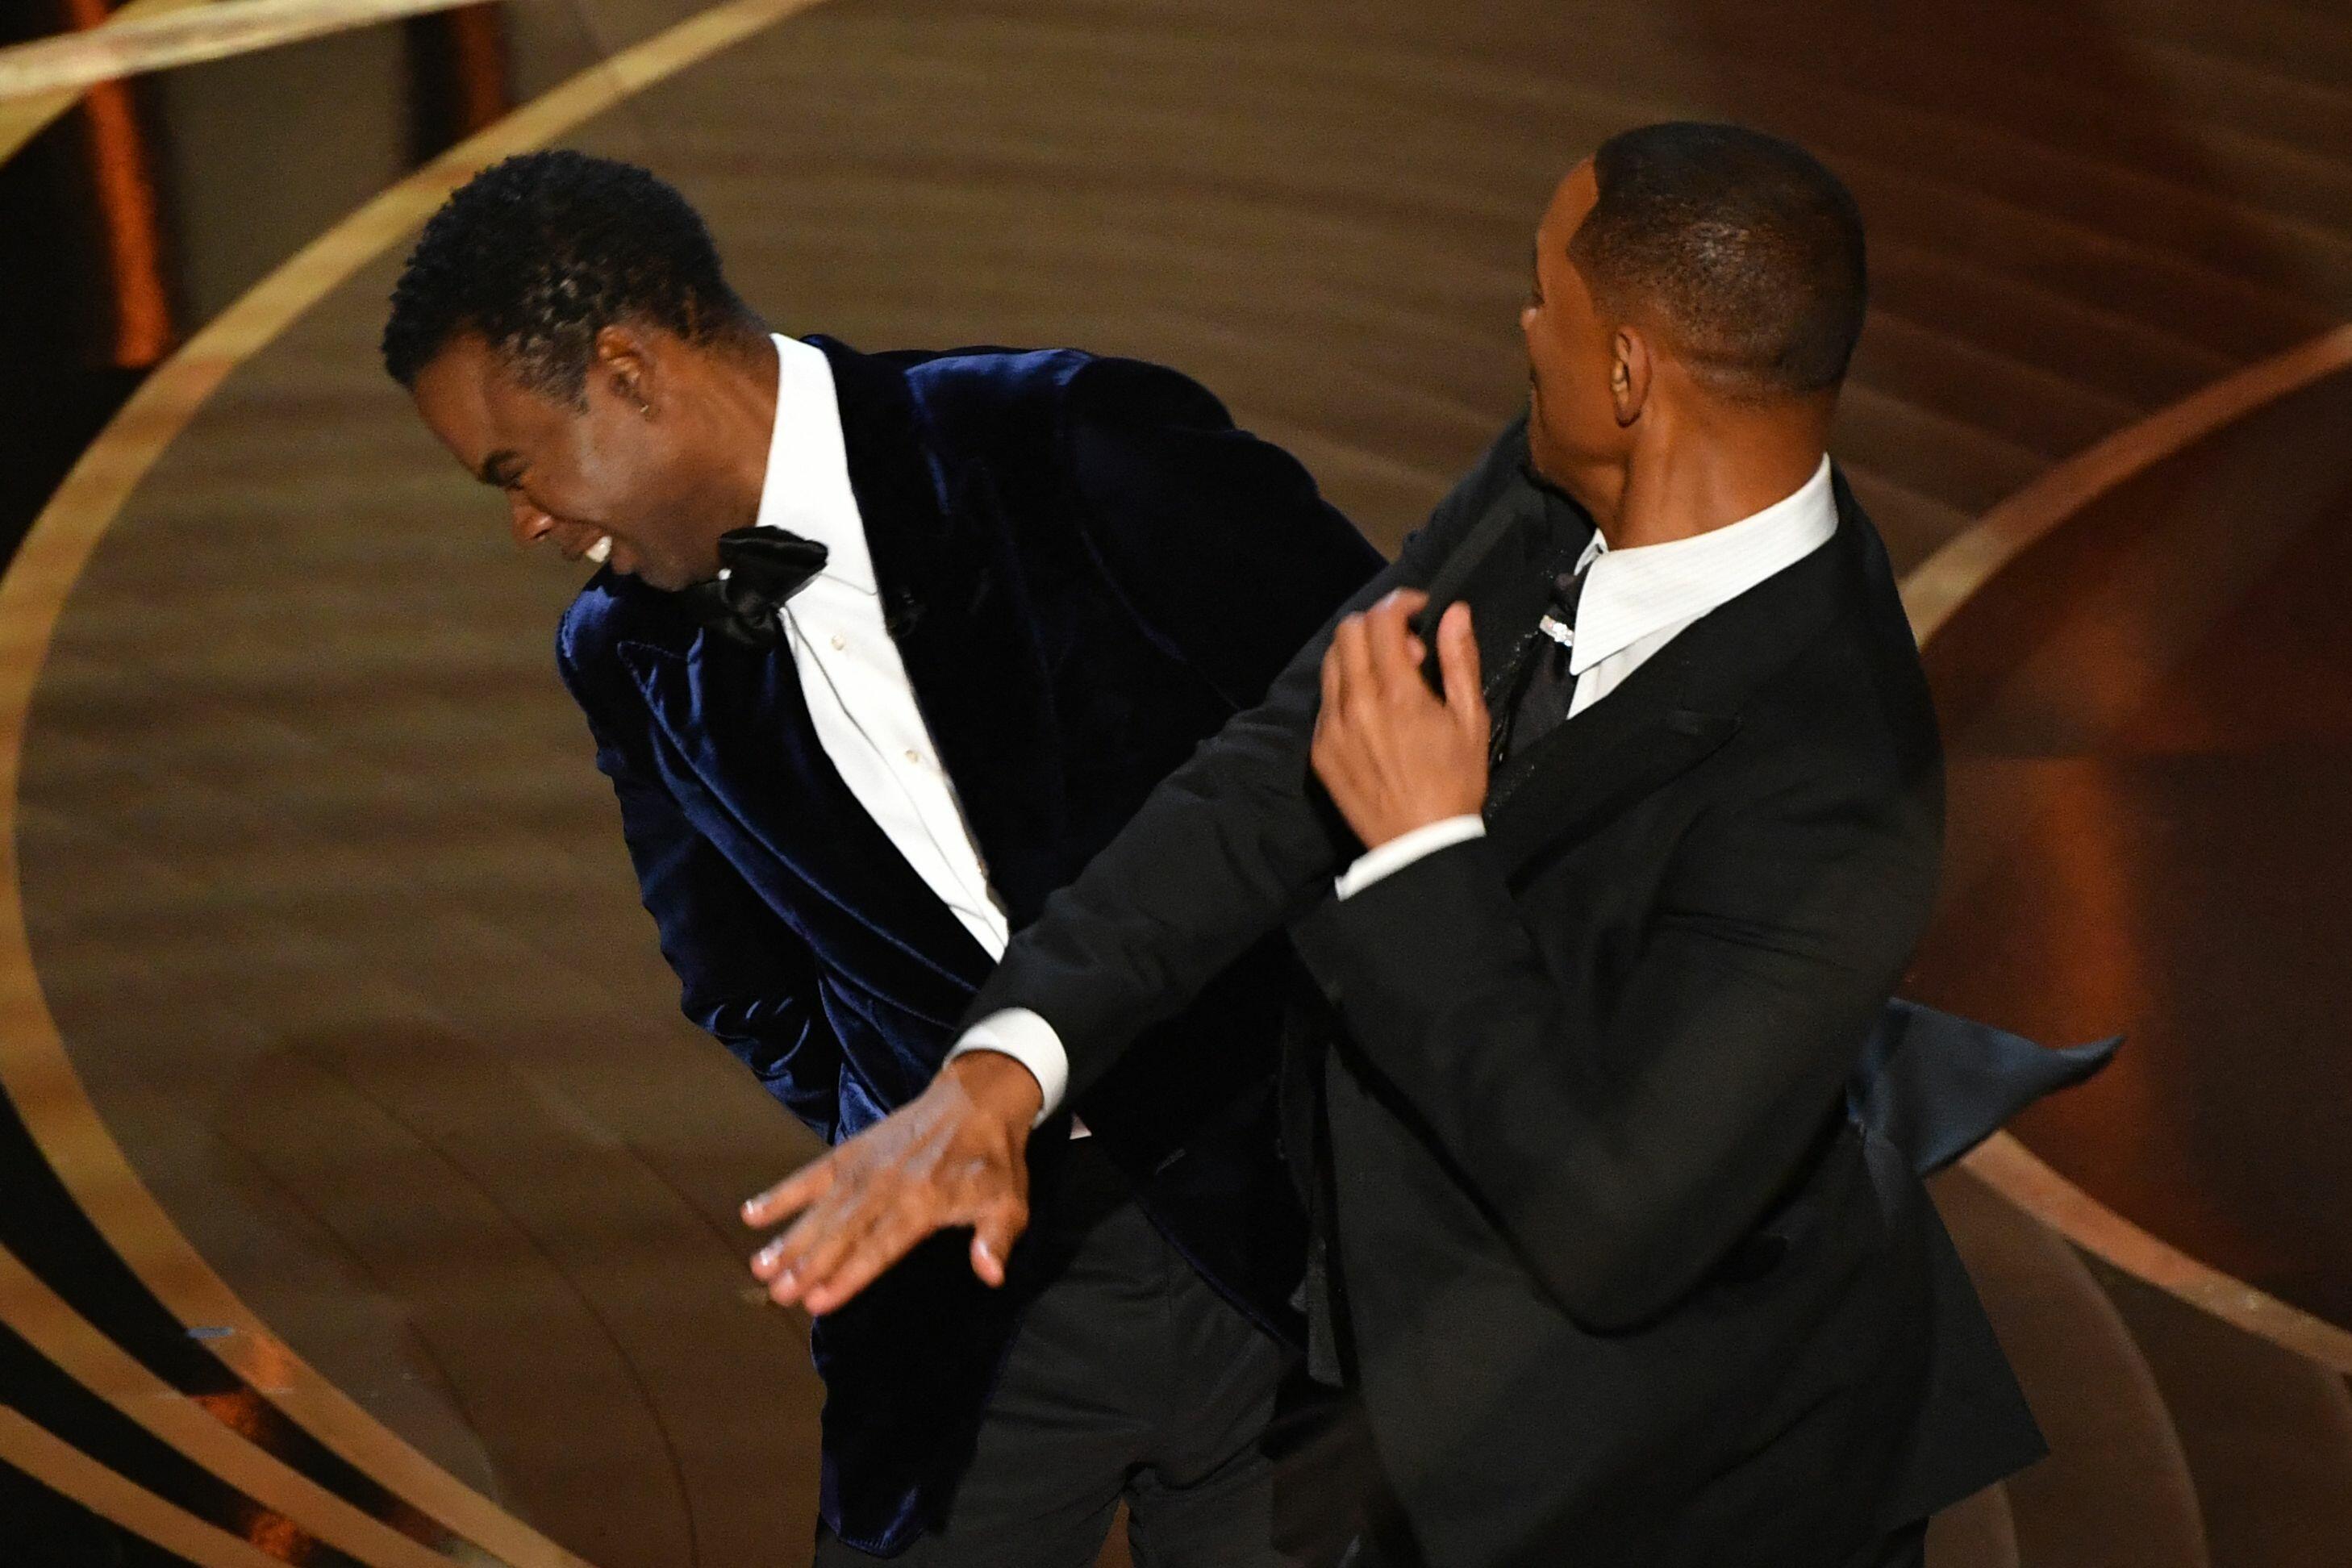 Donations to Will and Jada's Charity Went Way Down After the Oscar Slap